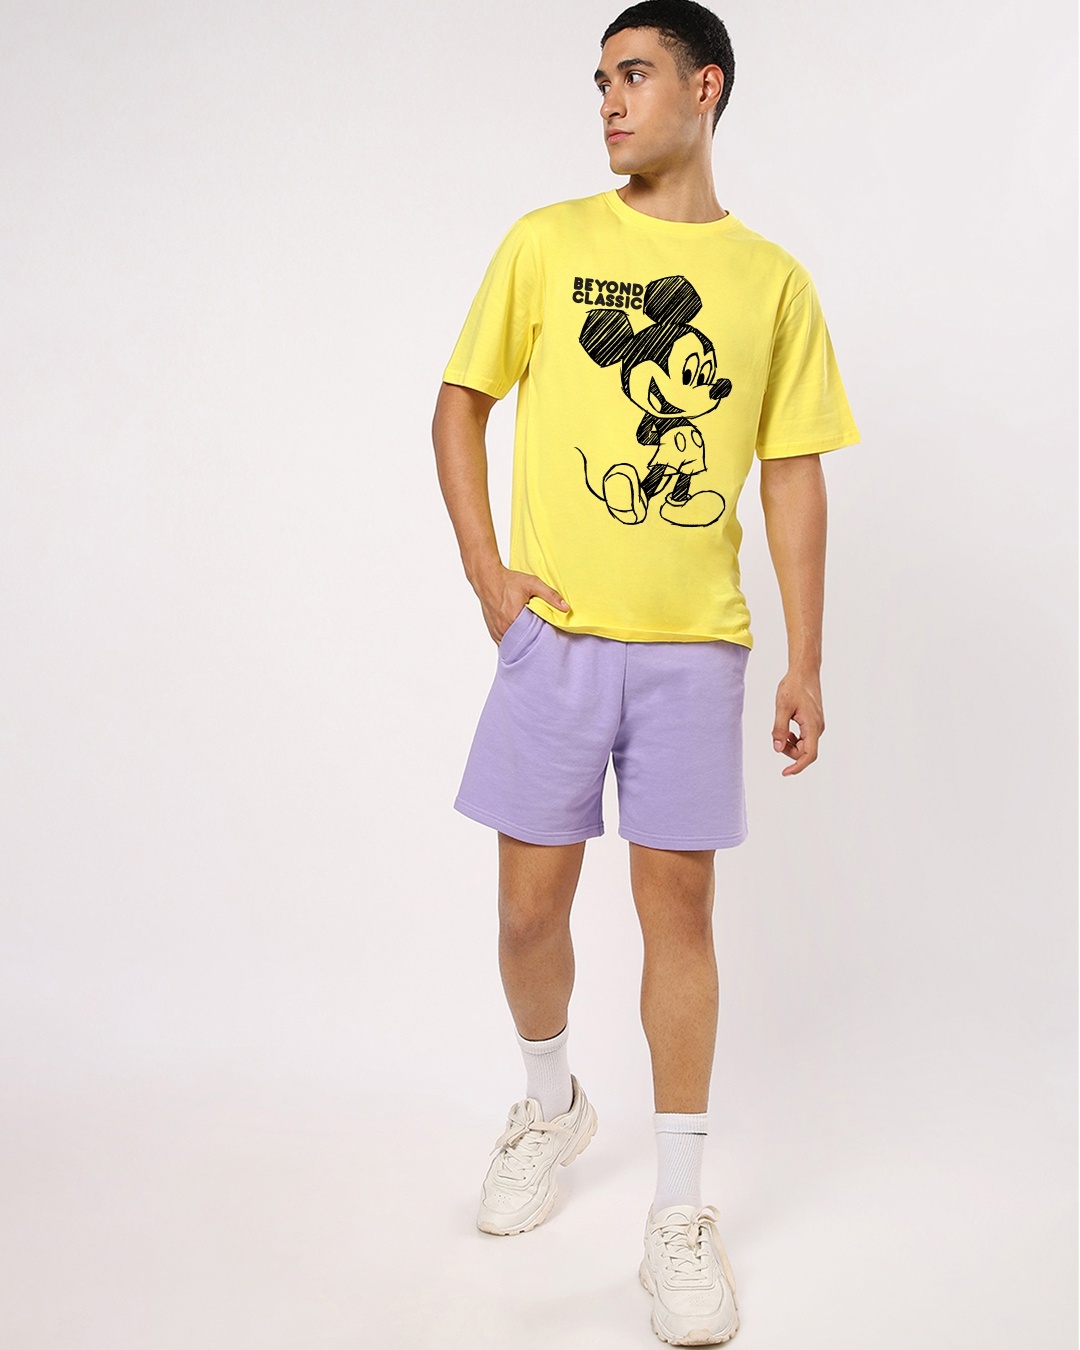 Shop Men's Yellow Beyond Classic Graphic Printed Oversized Fit T-shirt-Design